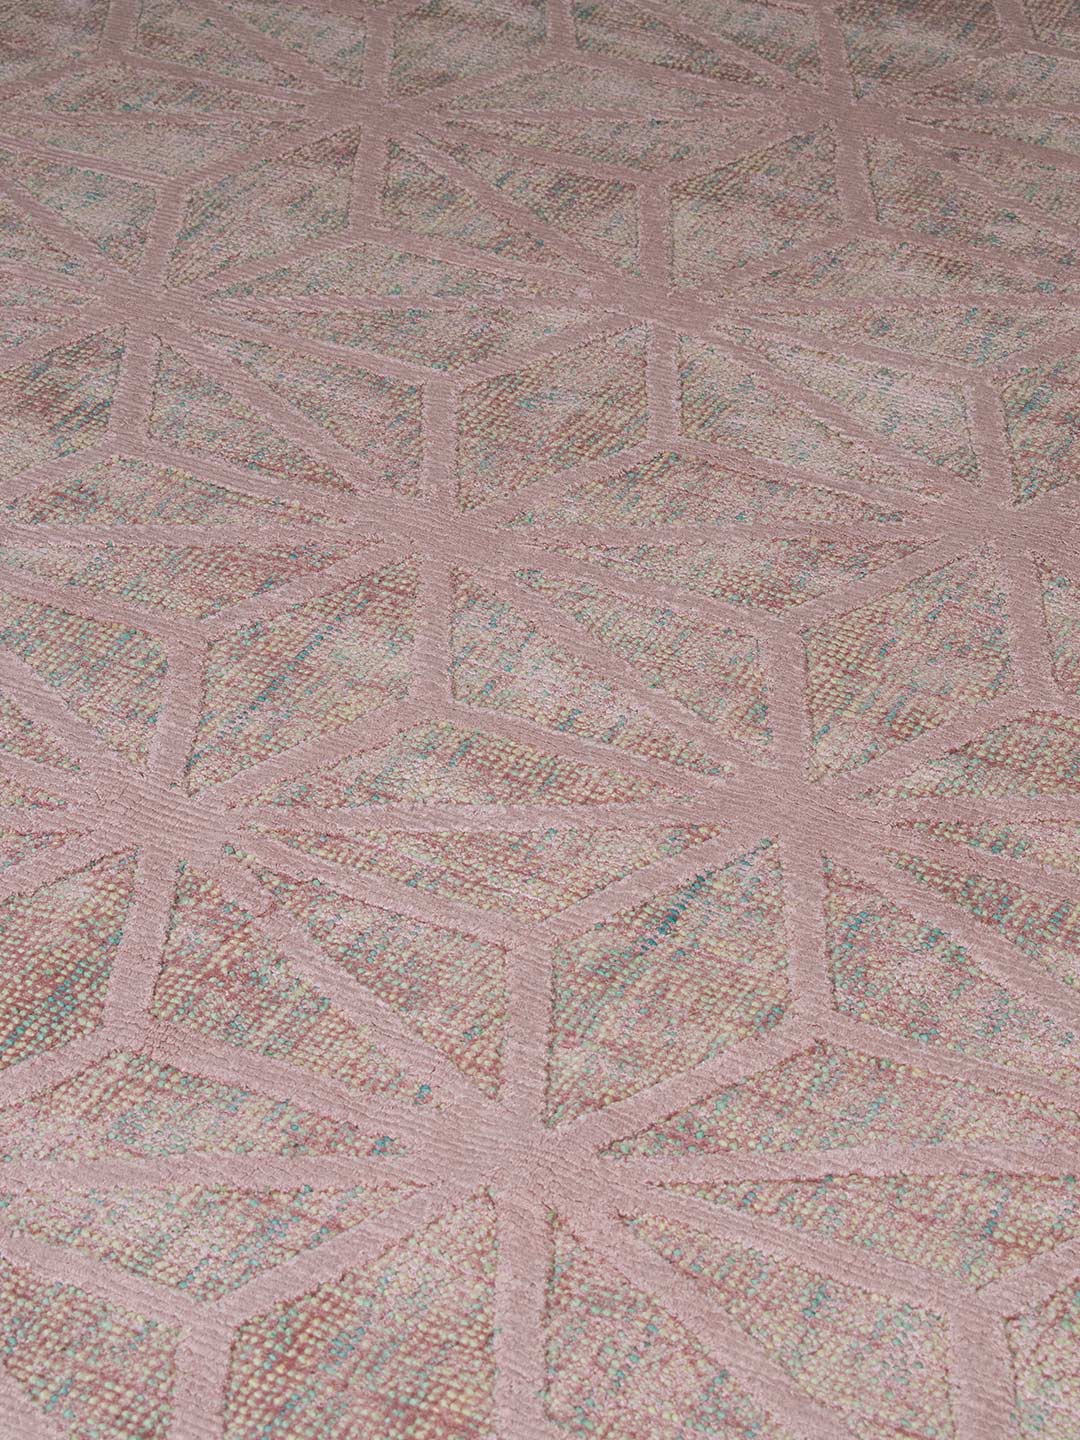 Calypso Rug | Candy - Enquire for availability